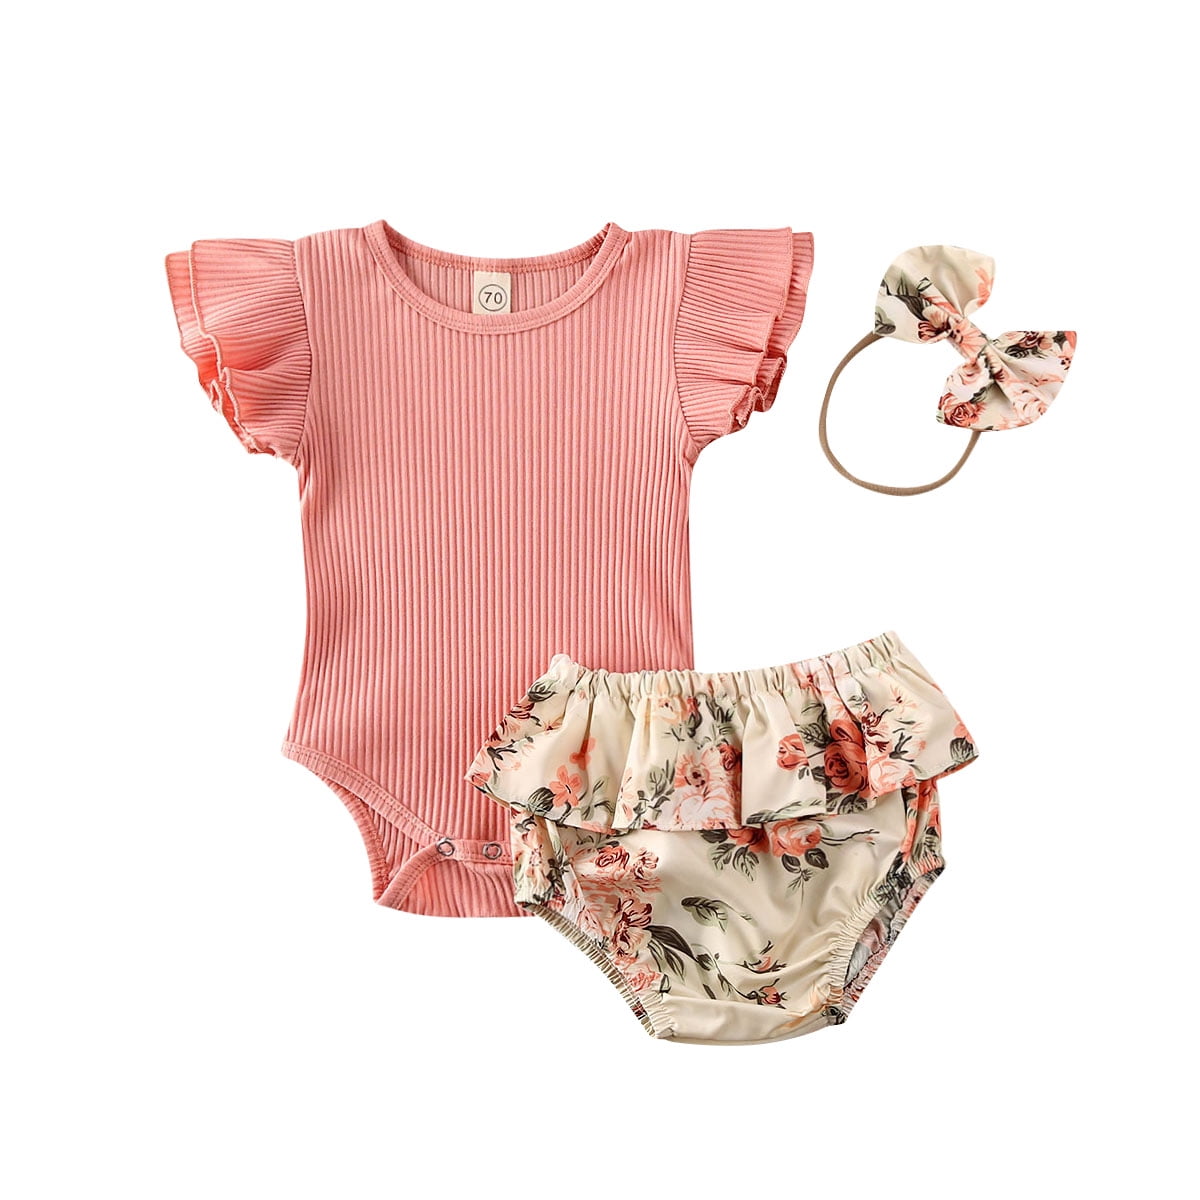 Infant Baby Girl Floral Ruffle Bloomers Outfit Blessed Romper Tops+Shorts+Headband Summer Clothes Set 